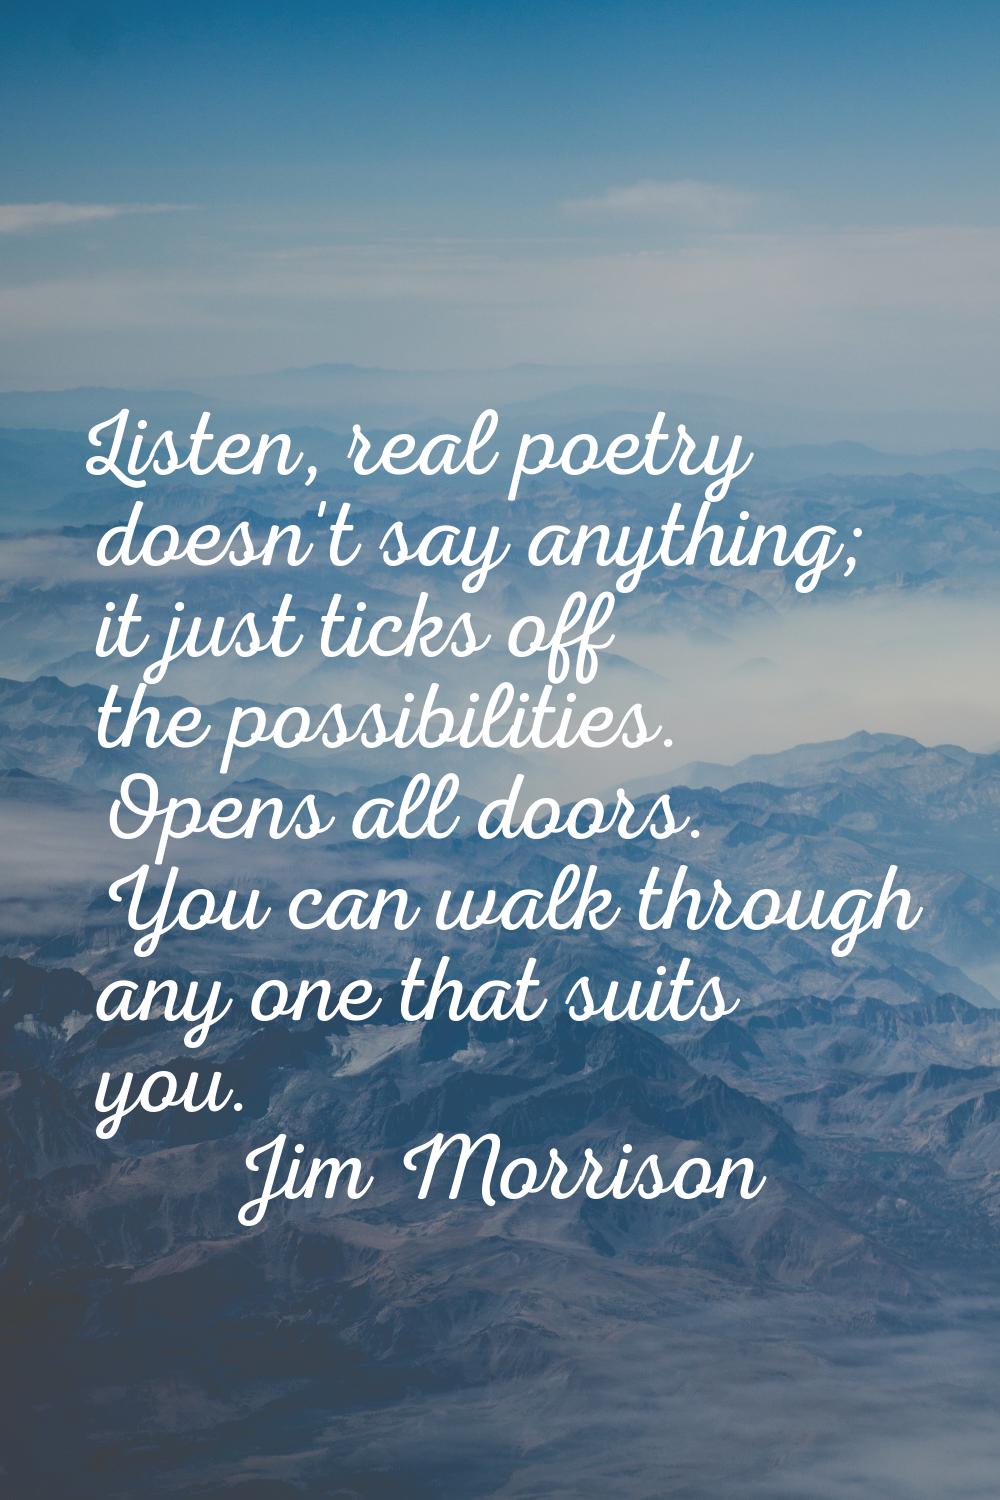 Listen, real poetry doesn't say anything; it just ticks off the possibilities. Opens all doors. You